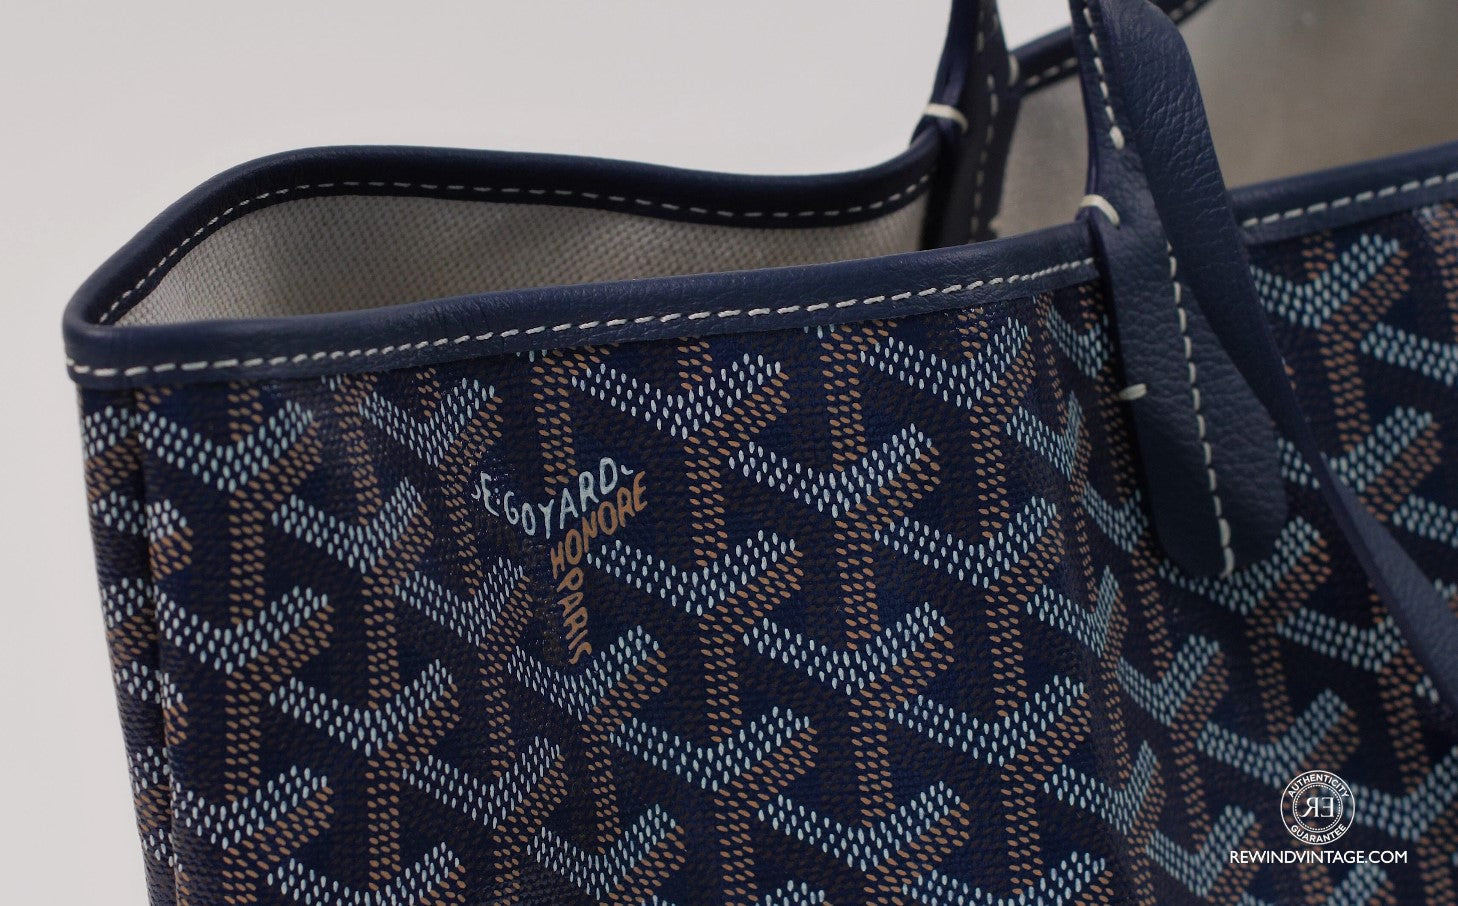 Quick Tips to Authenticate the Goyard Structured Mini Saigon - Academy by  FASHIONPHILE